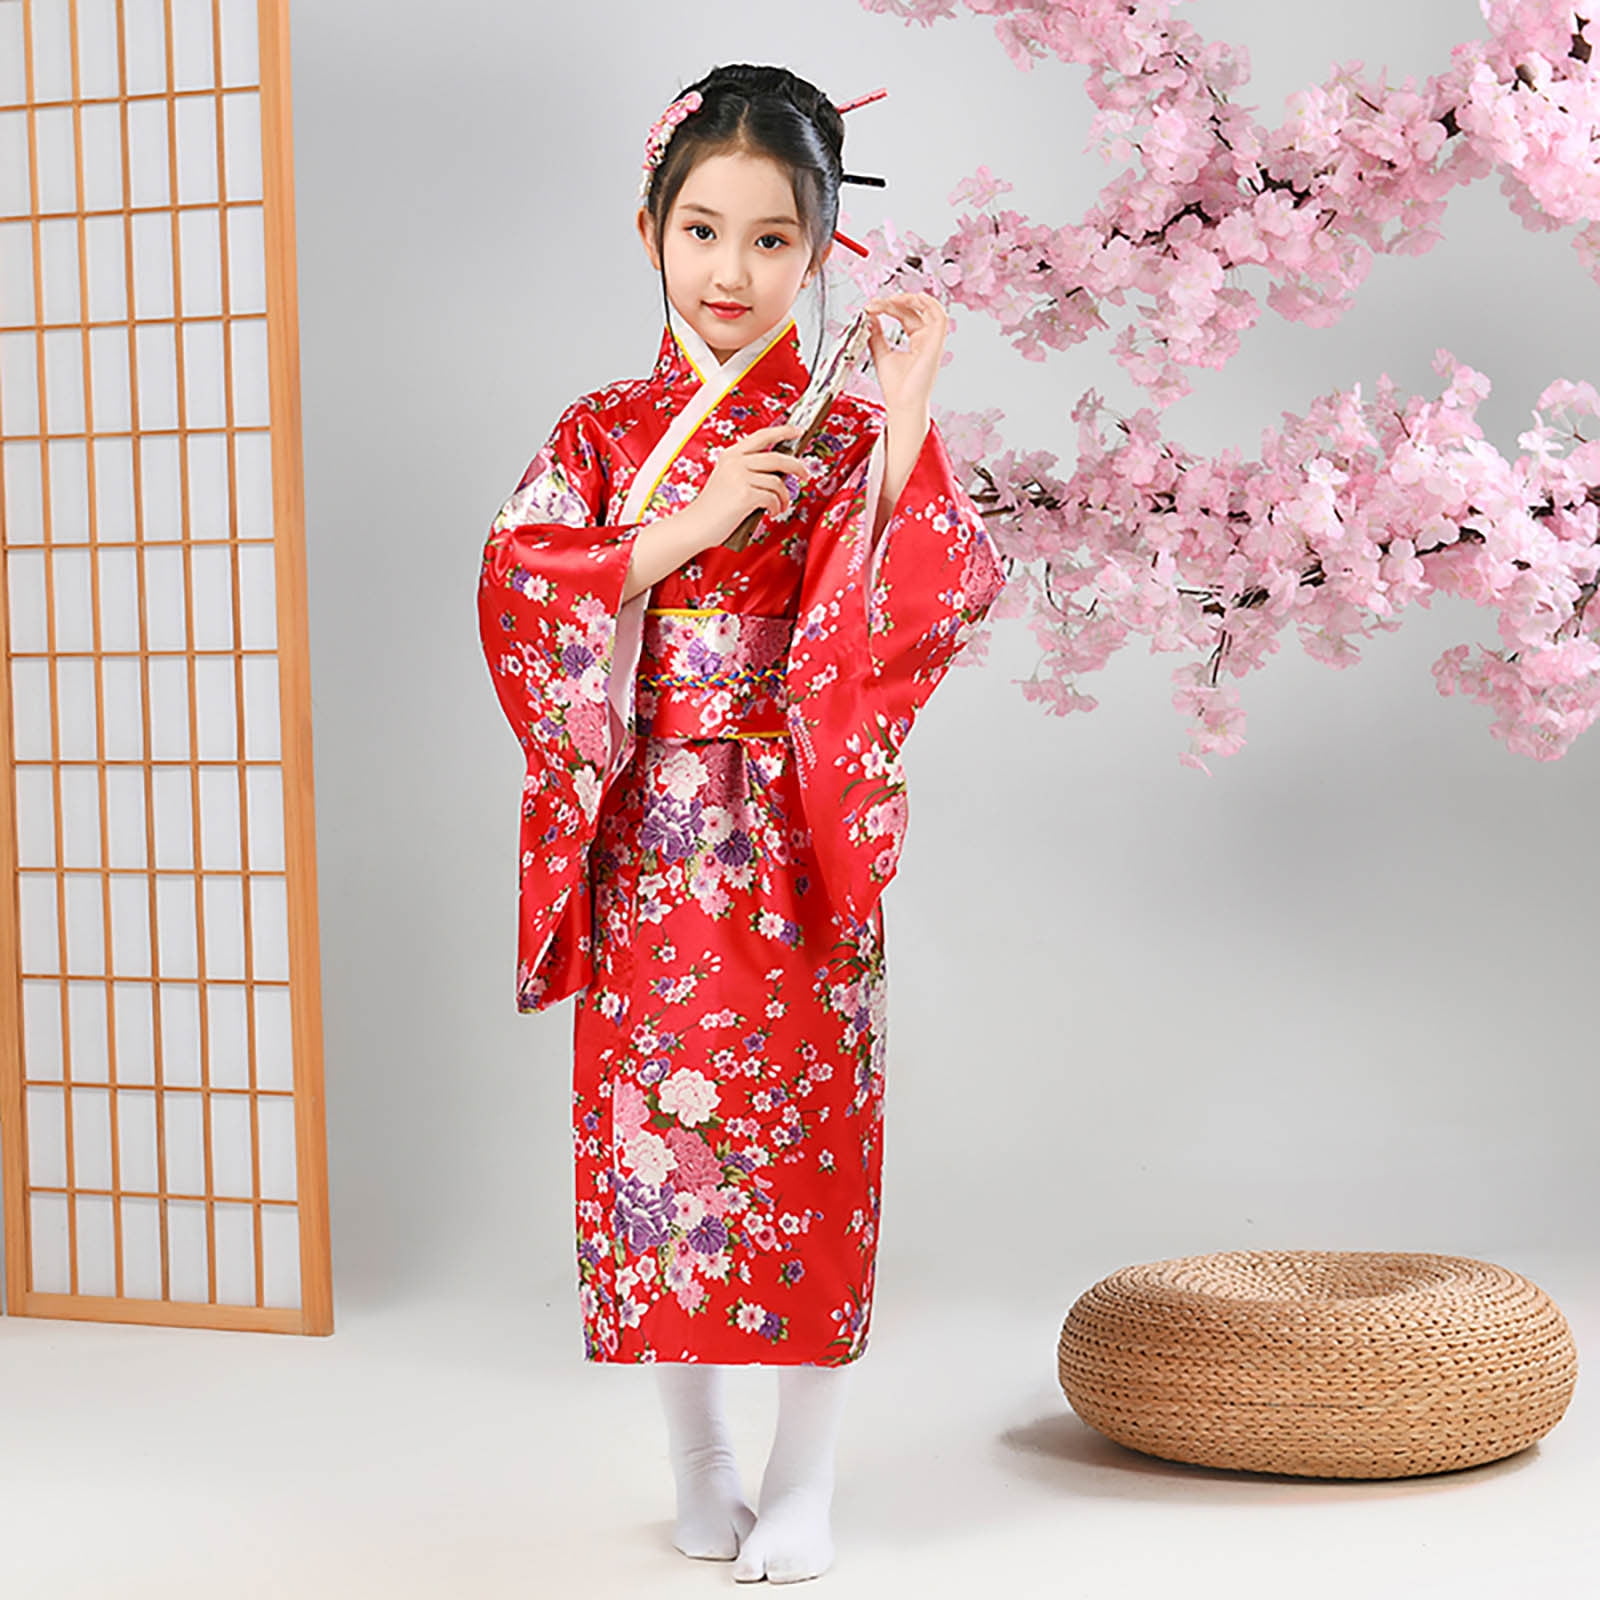 Japanese Girl Names Meaning Moon: Discover the Celestial Beauty